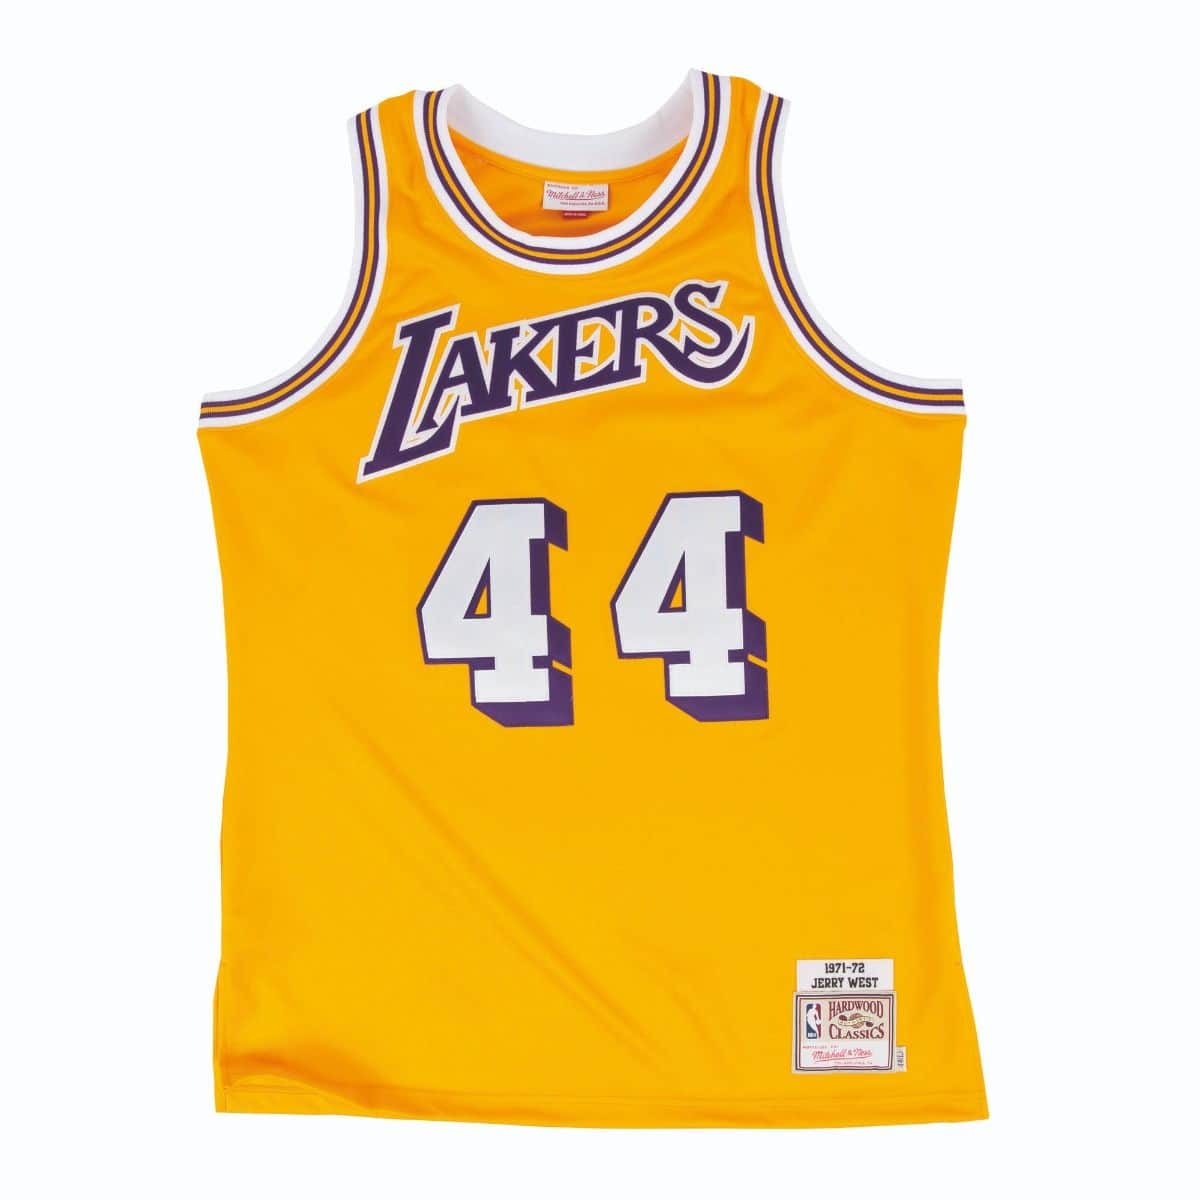 Authentic Jersey Los Angeles Lakers 1971-72 Jerry West